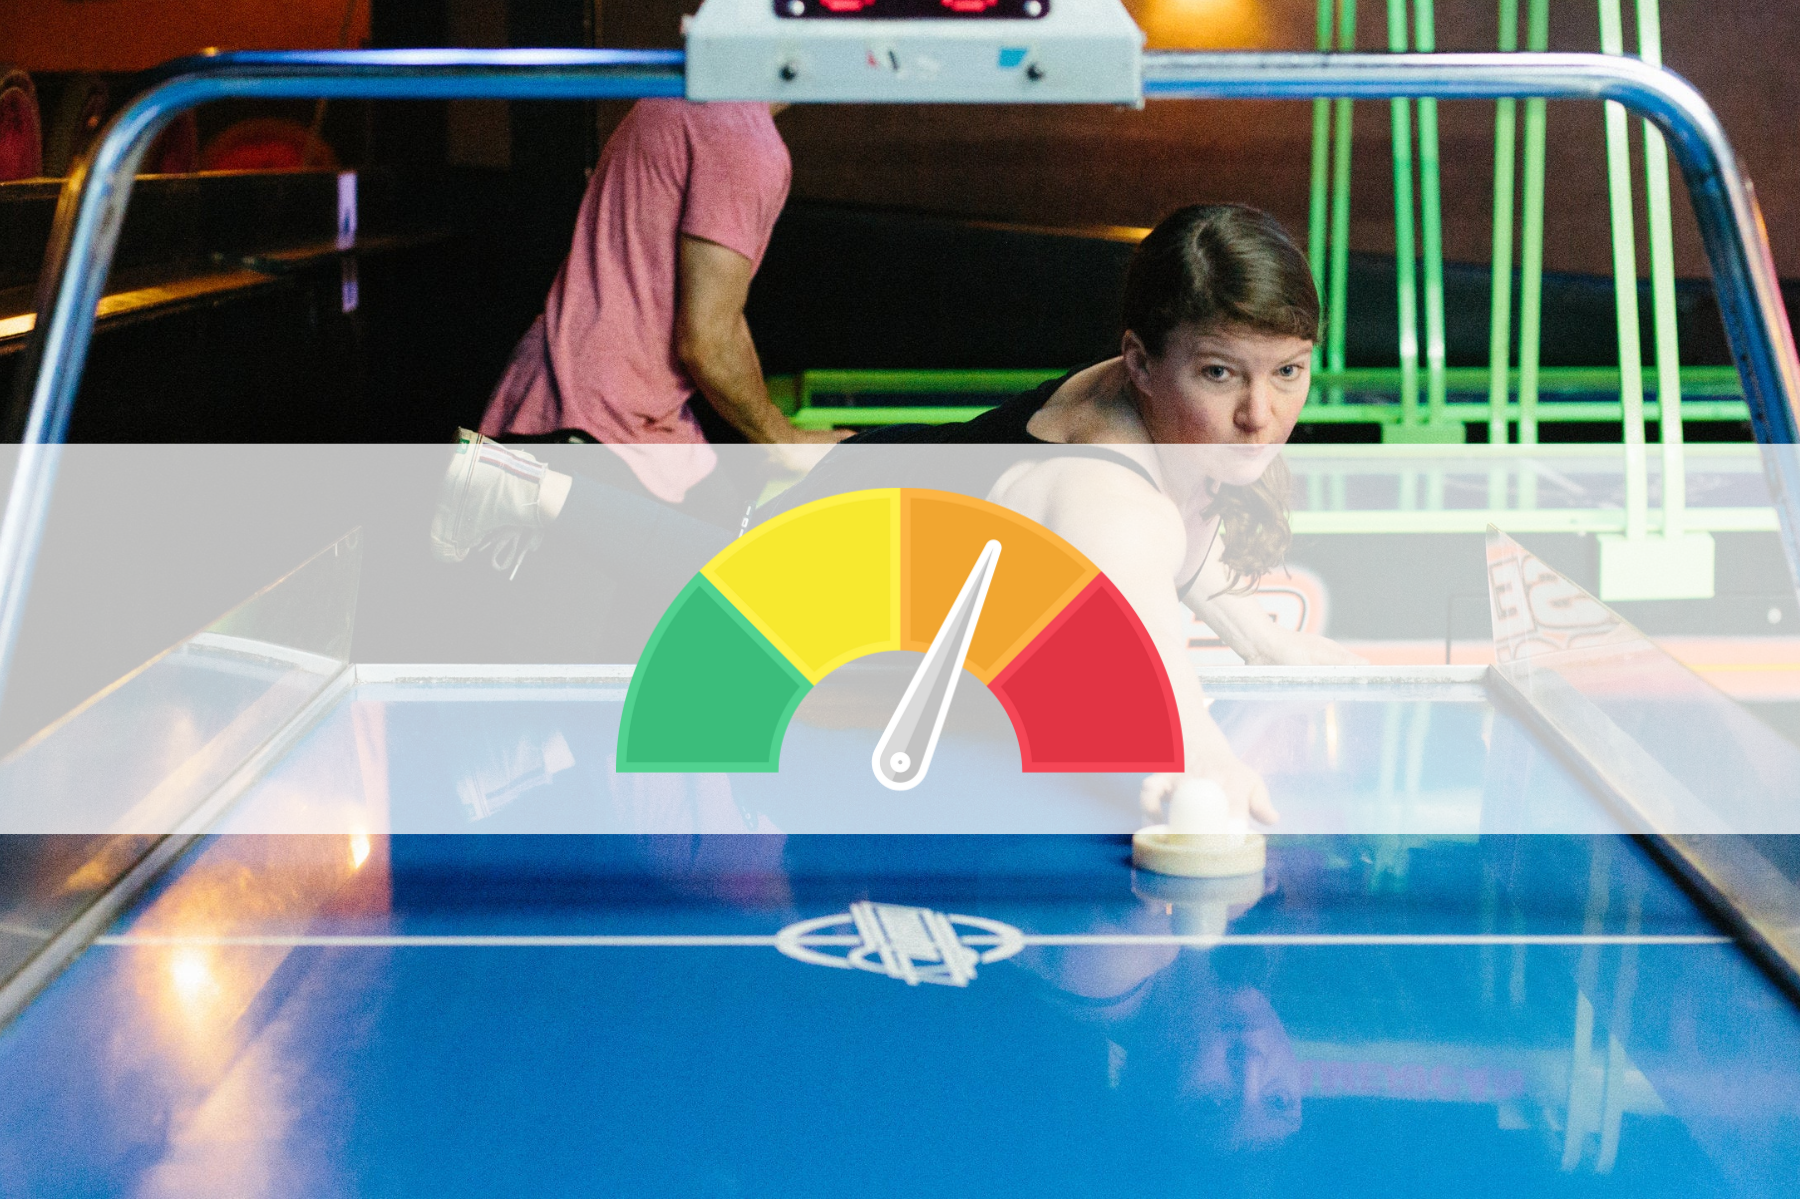 A woman engaged in a game of air hockey at a table